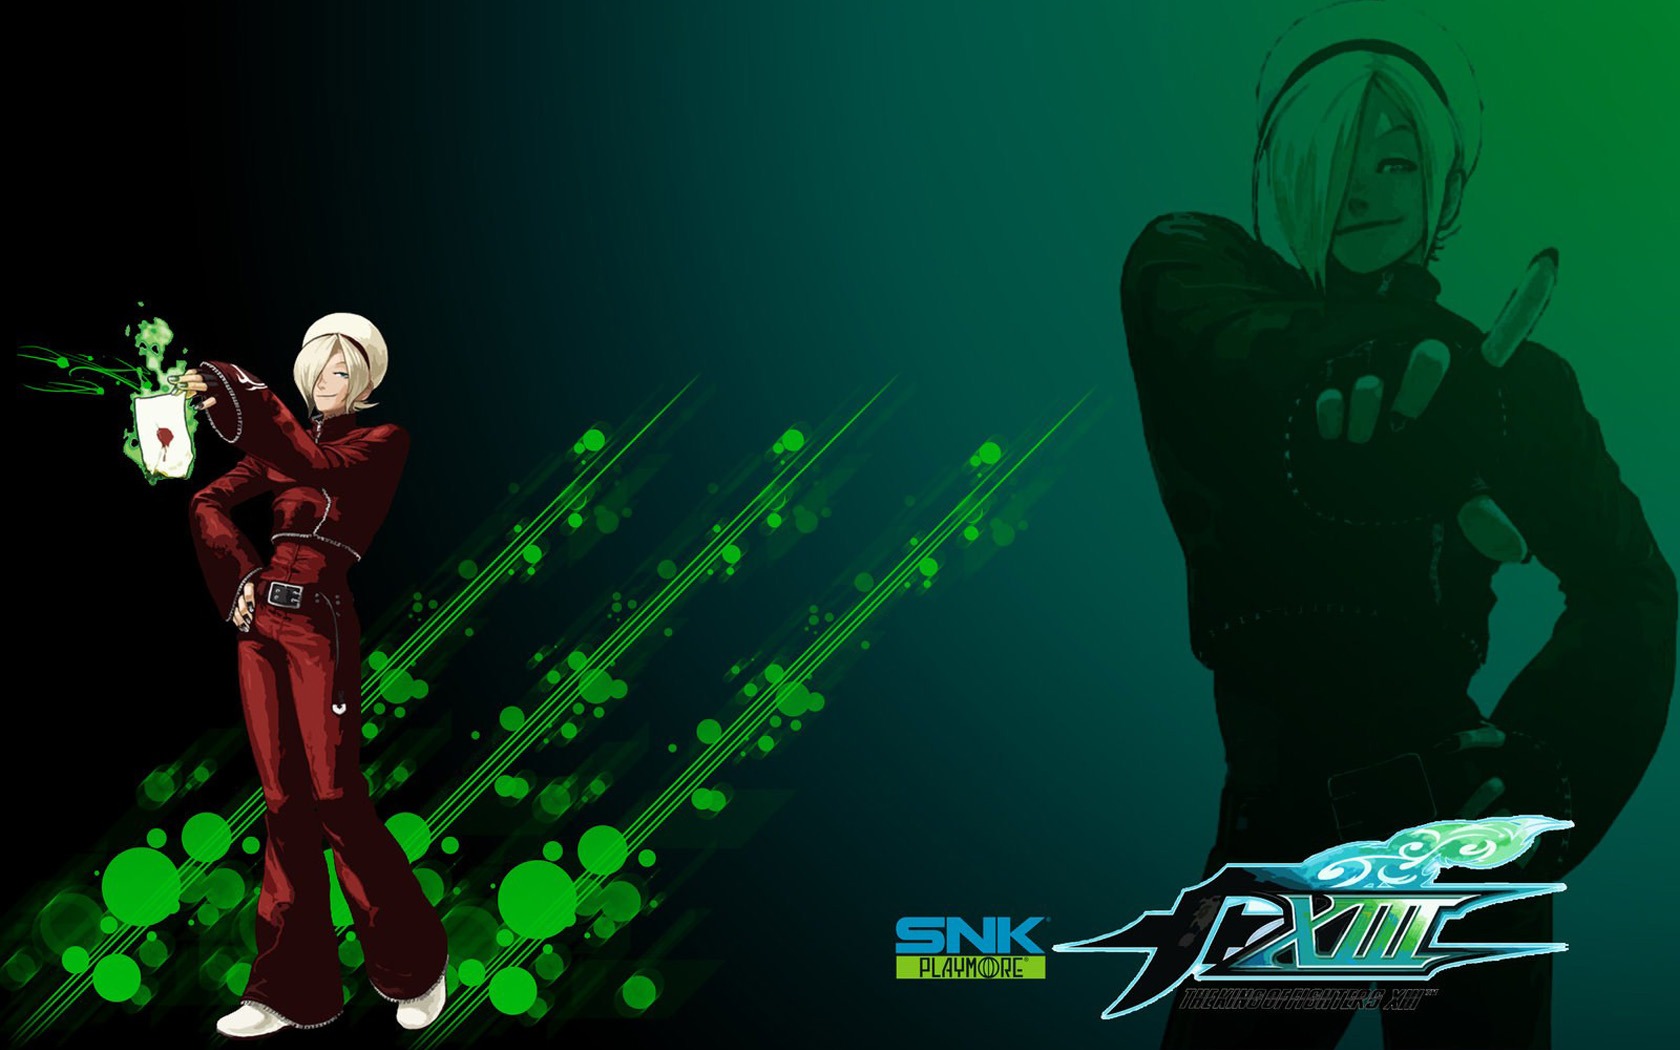 Le roi de wallpapers Fighters XIII #10 - 1680x1050